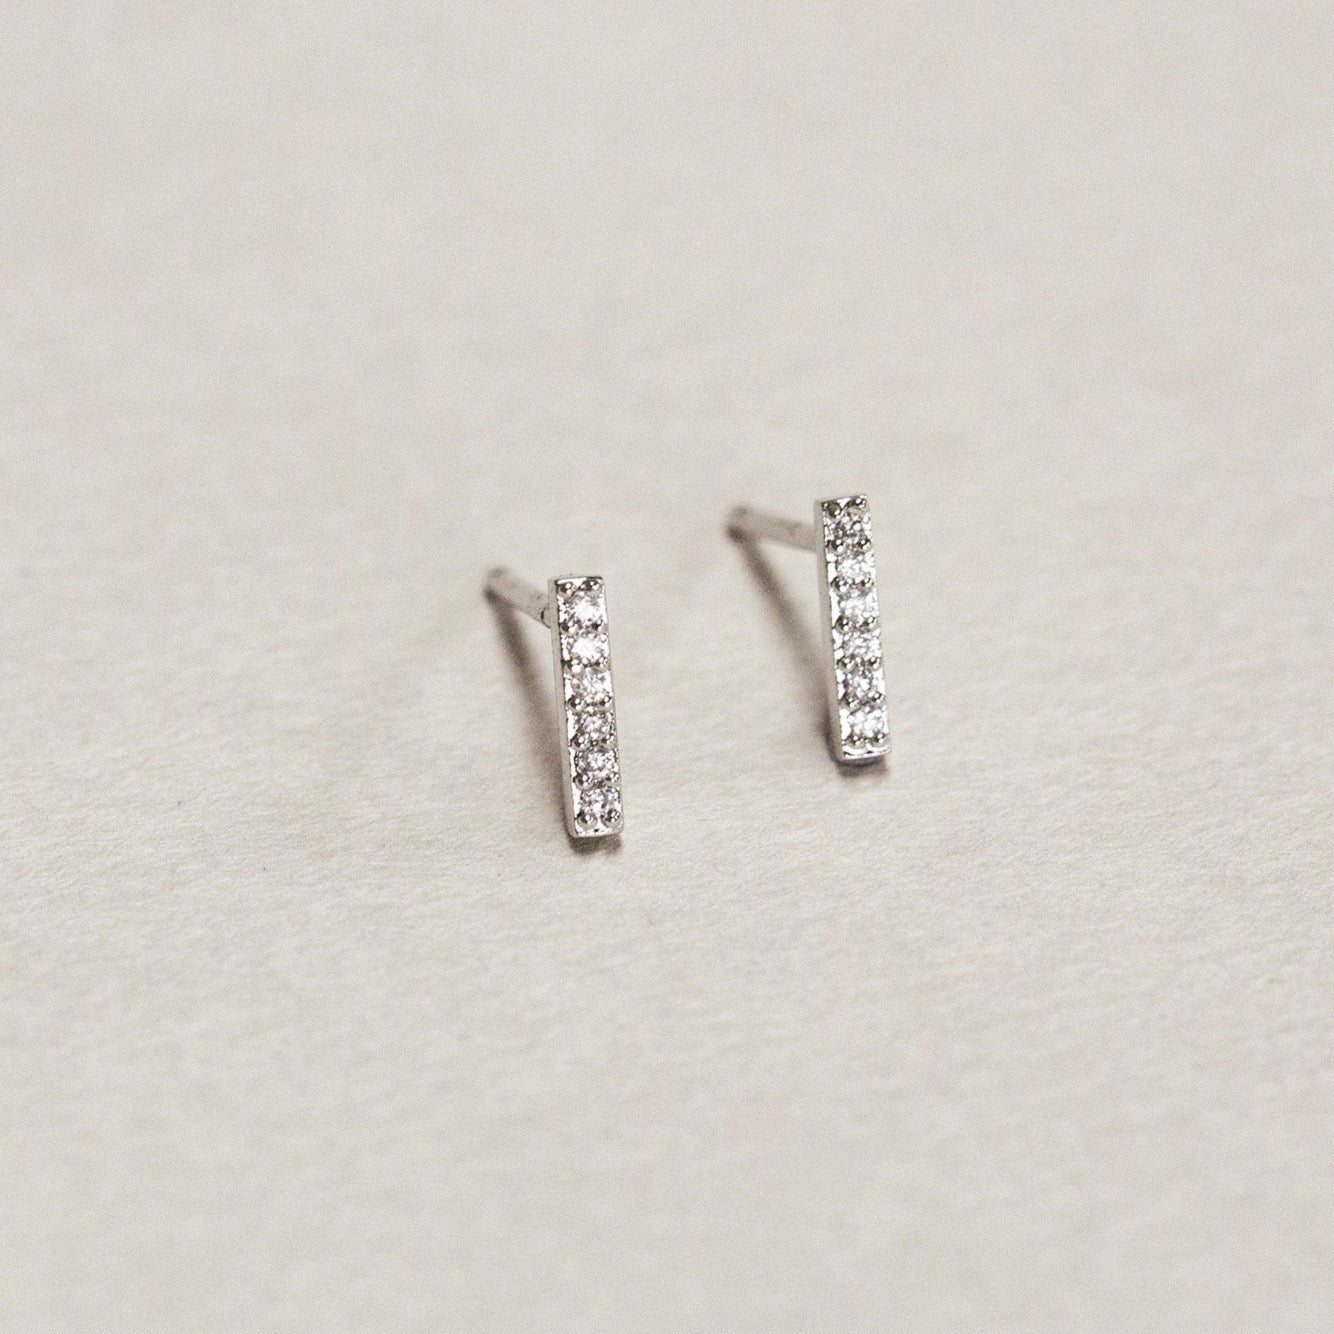 extremly versatile studs that are perfect for any 'ear cocktail'